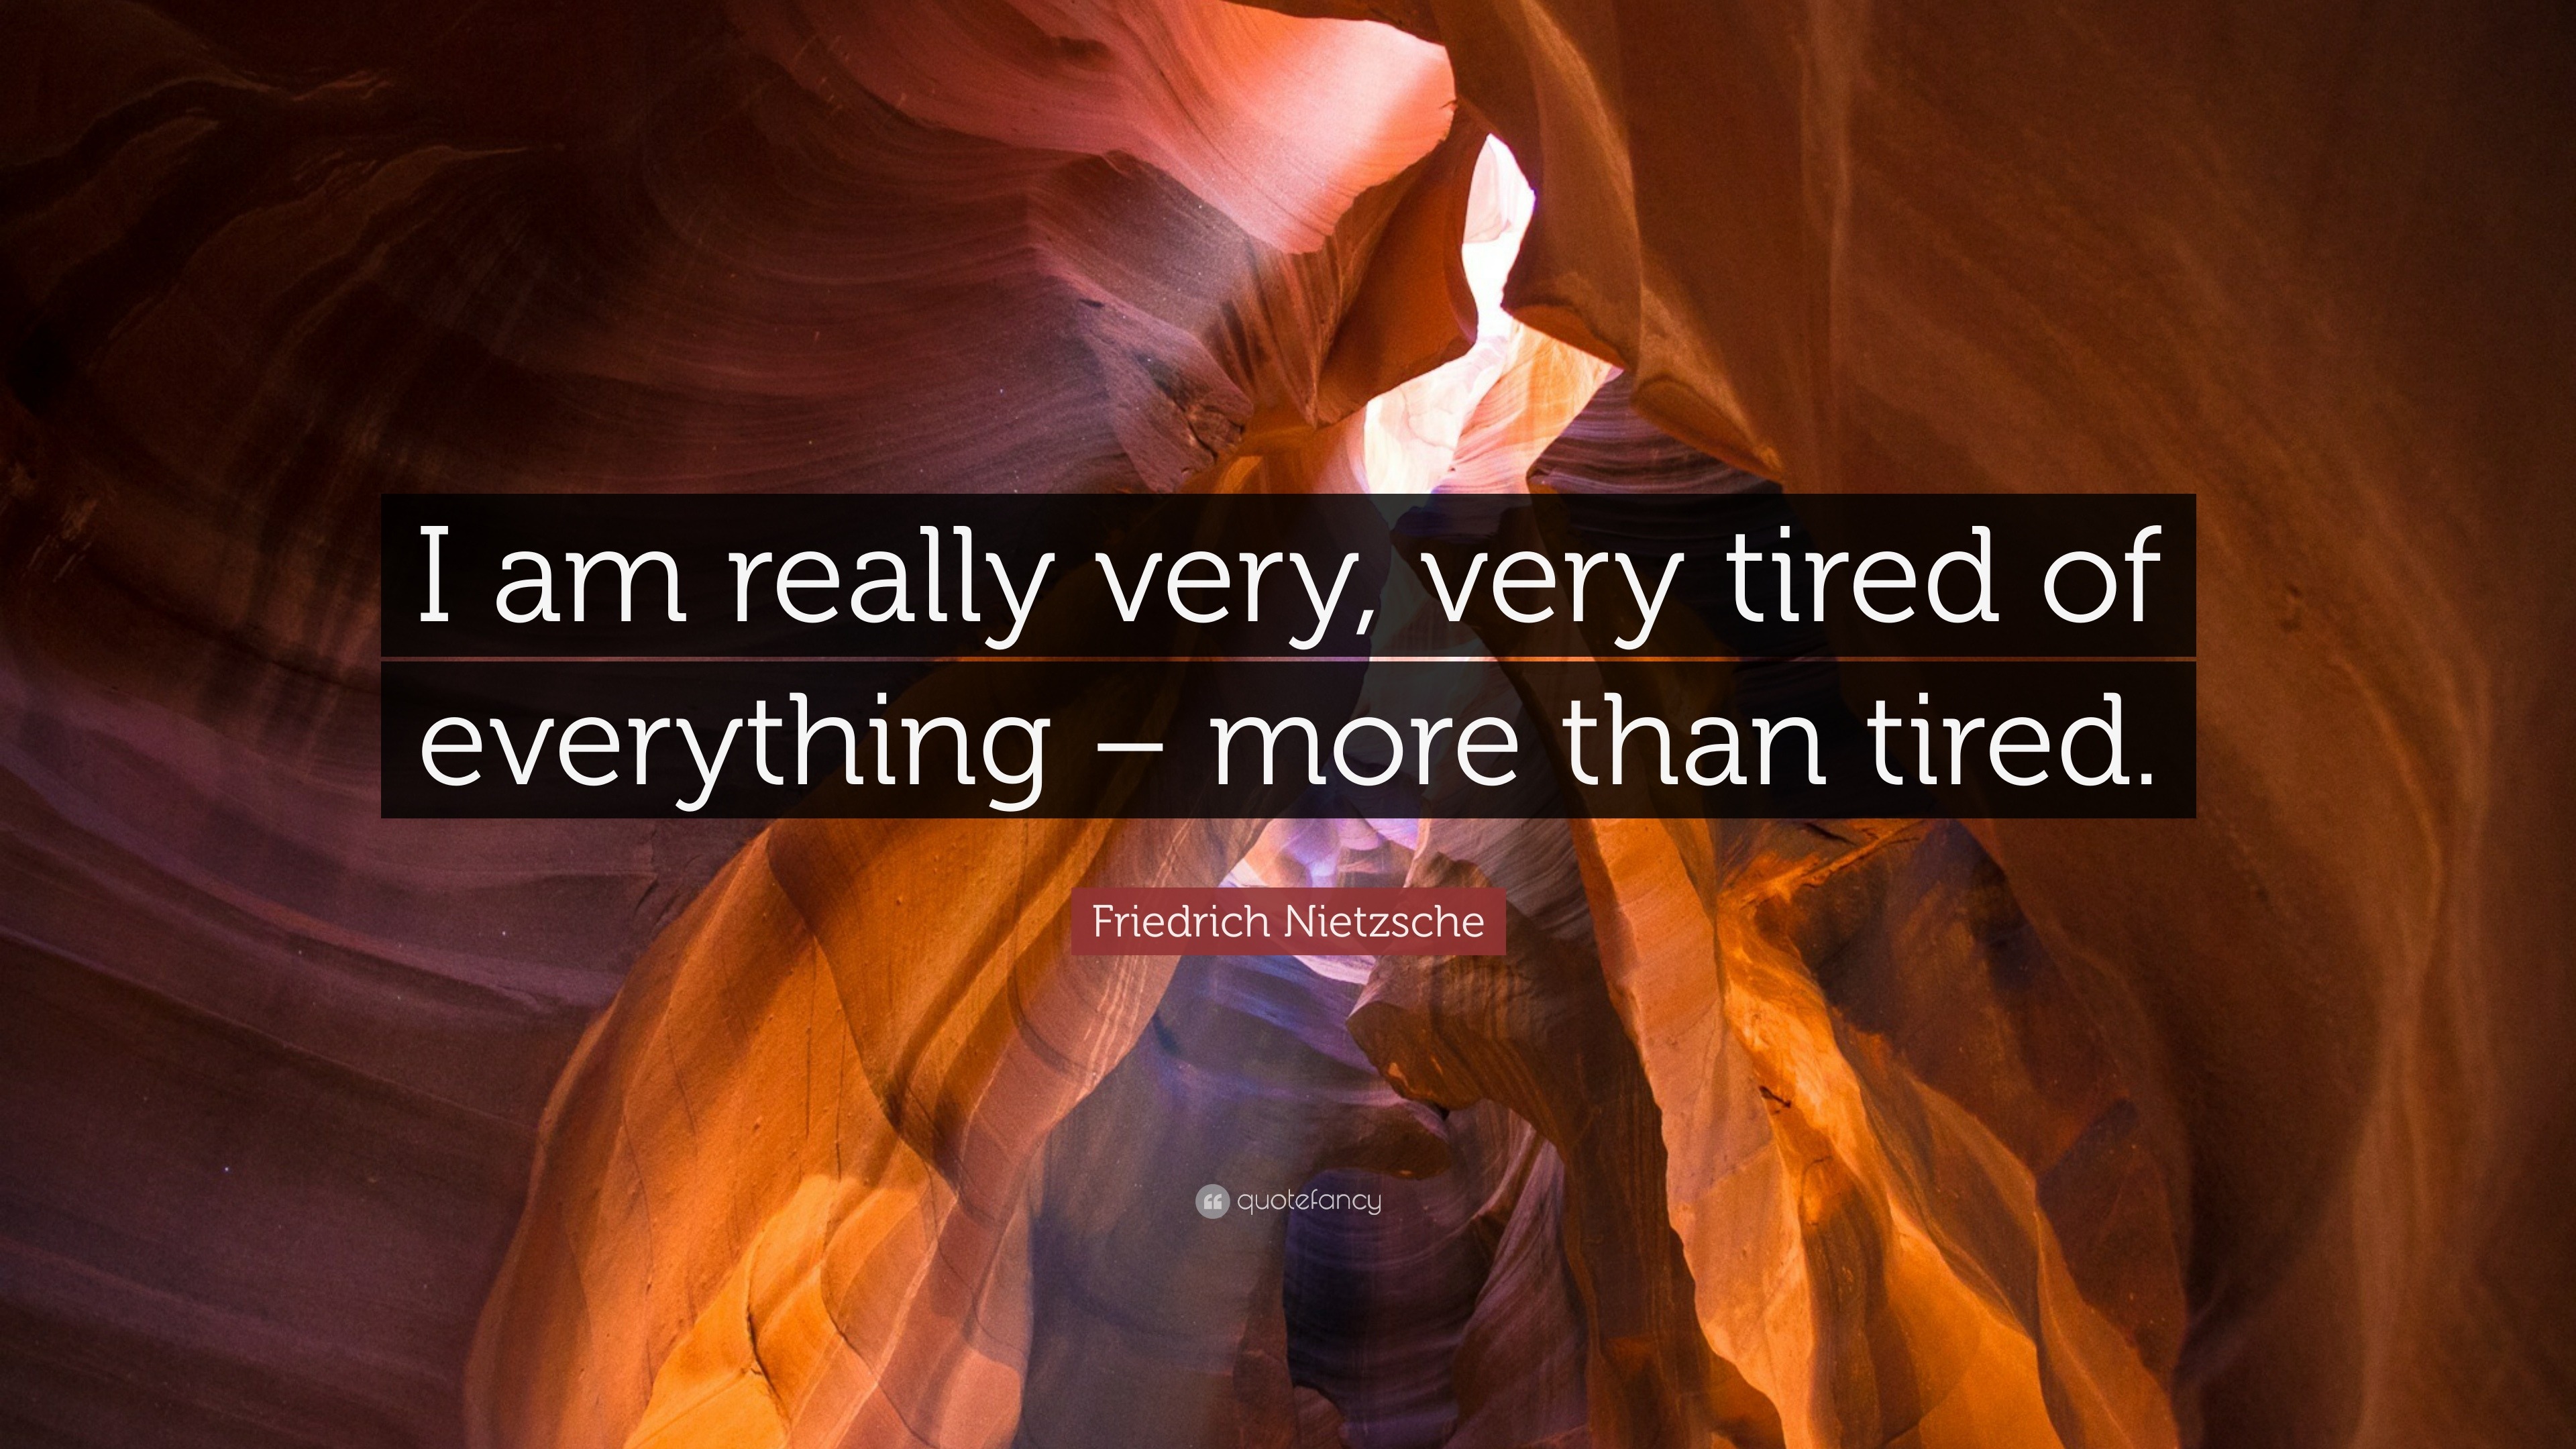 Friedrich Nietzsche Quote “I am really very, very tired